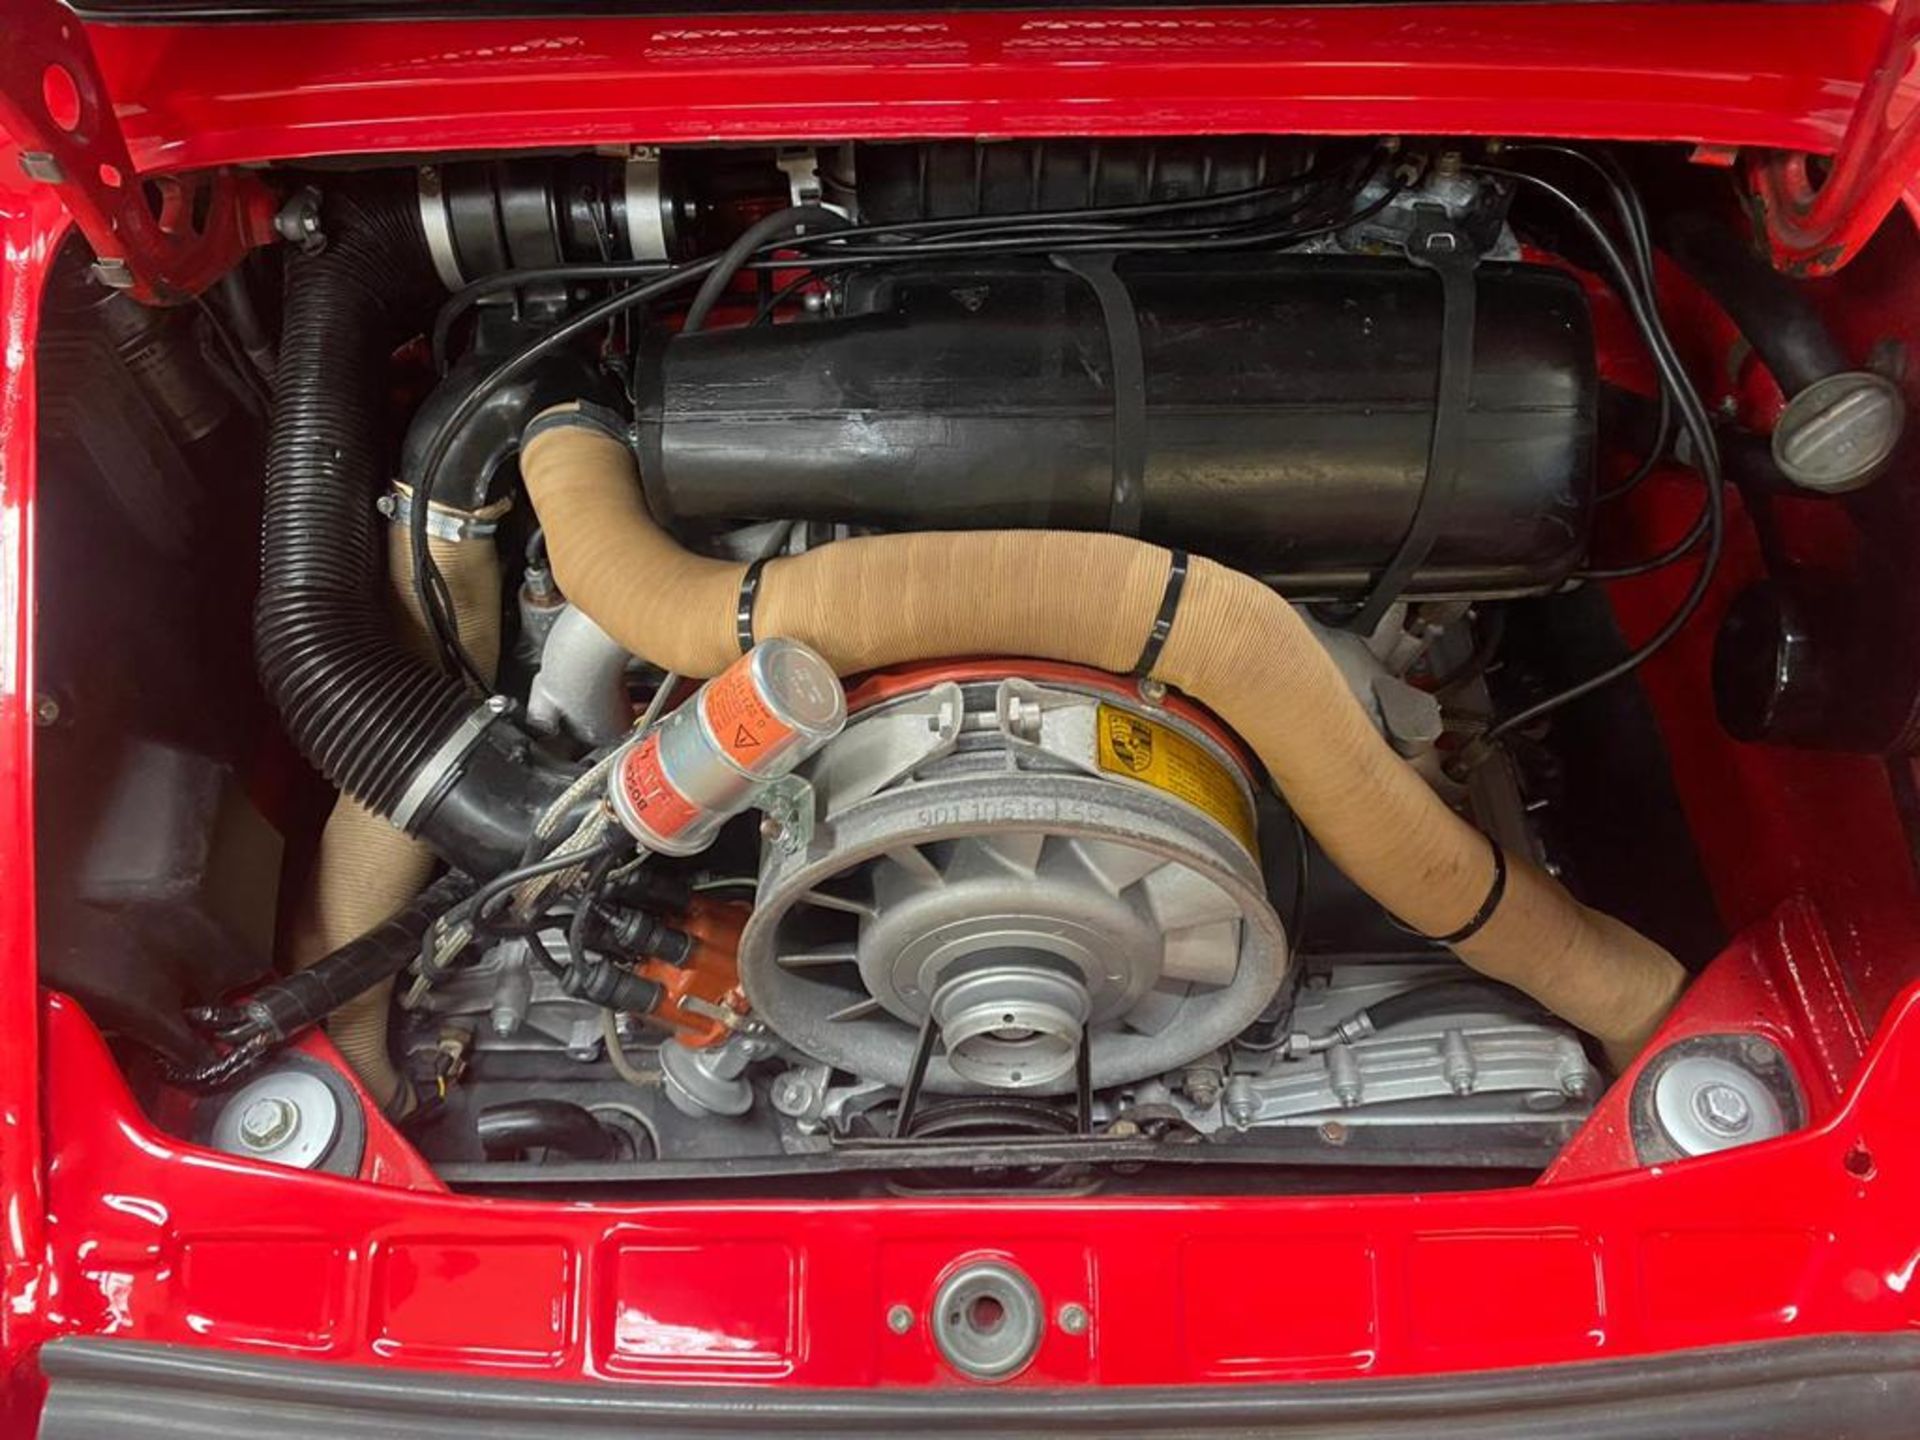 1980 PORSCHE 911 SC SPORT WHICH HAS BEEN FULLY REBUILT TO BE IDENTICAL TO A 1974 911 RSR *NO VAT* - Image 9 of 12